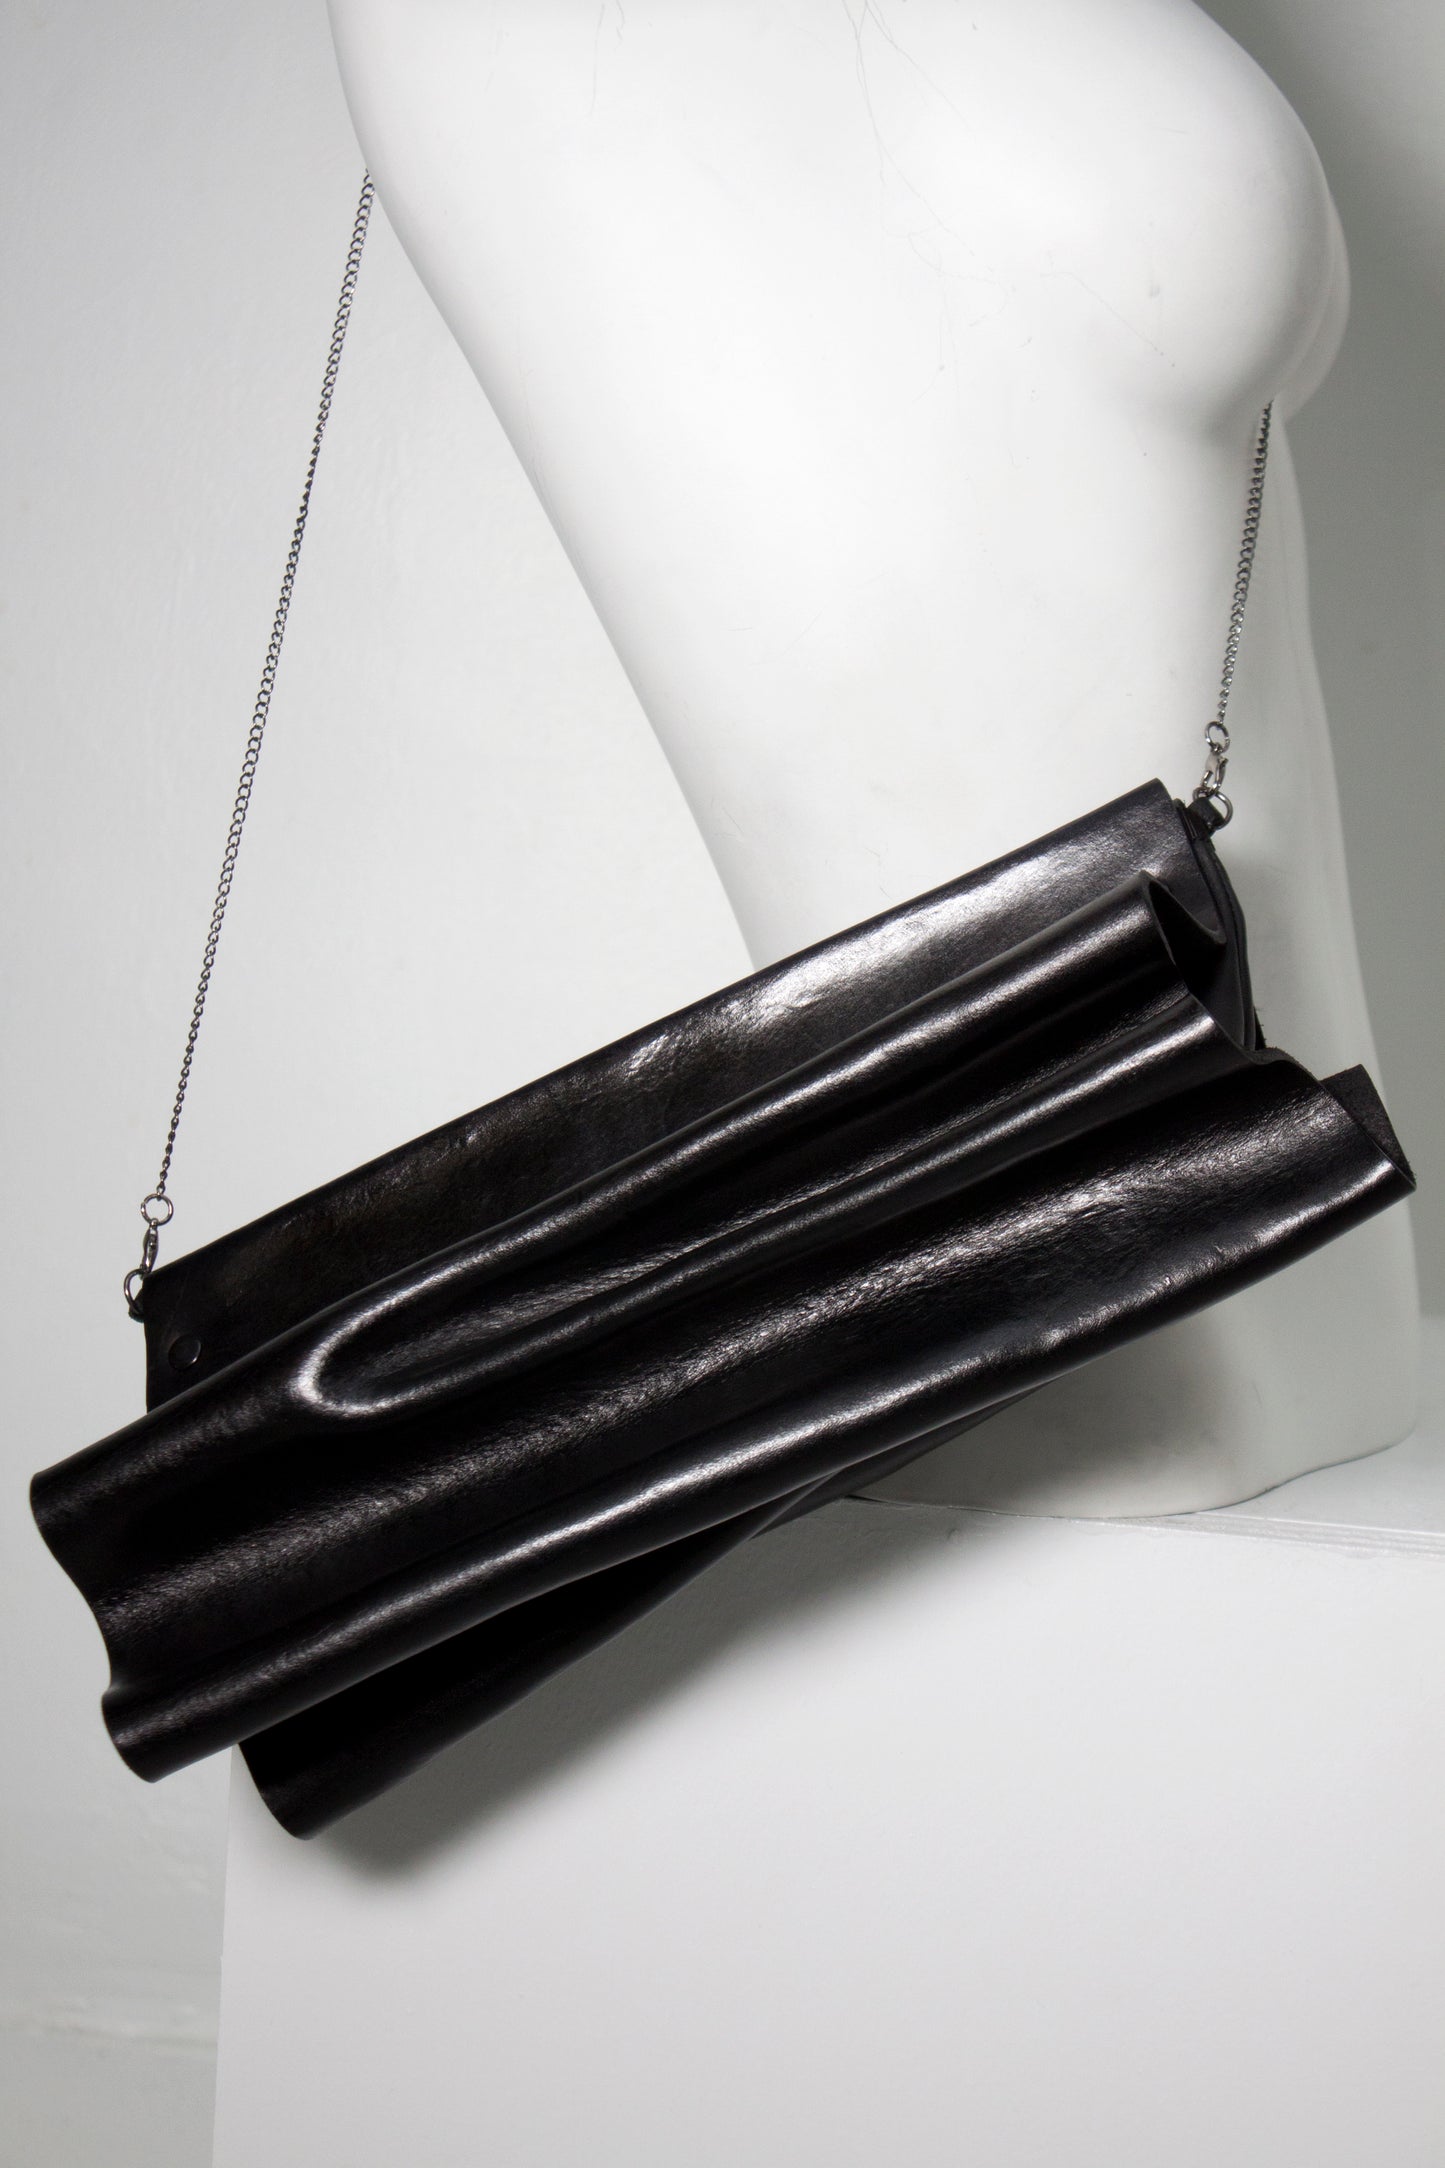 MOLDED LEATHER BAG